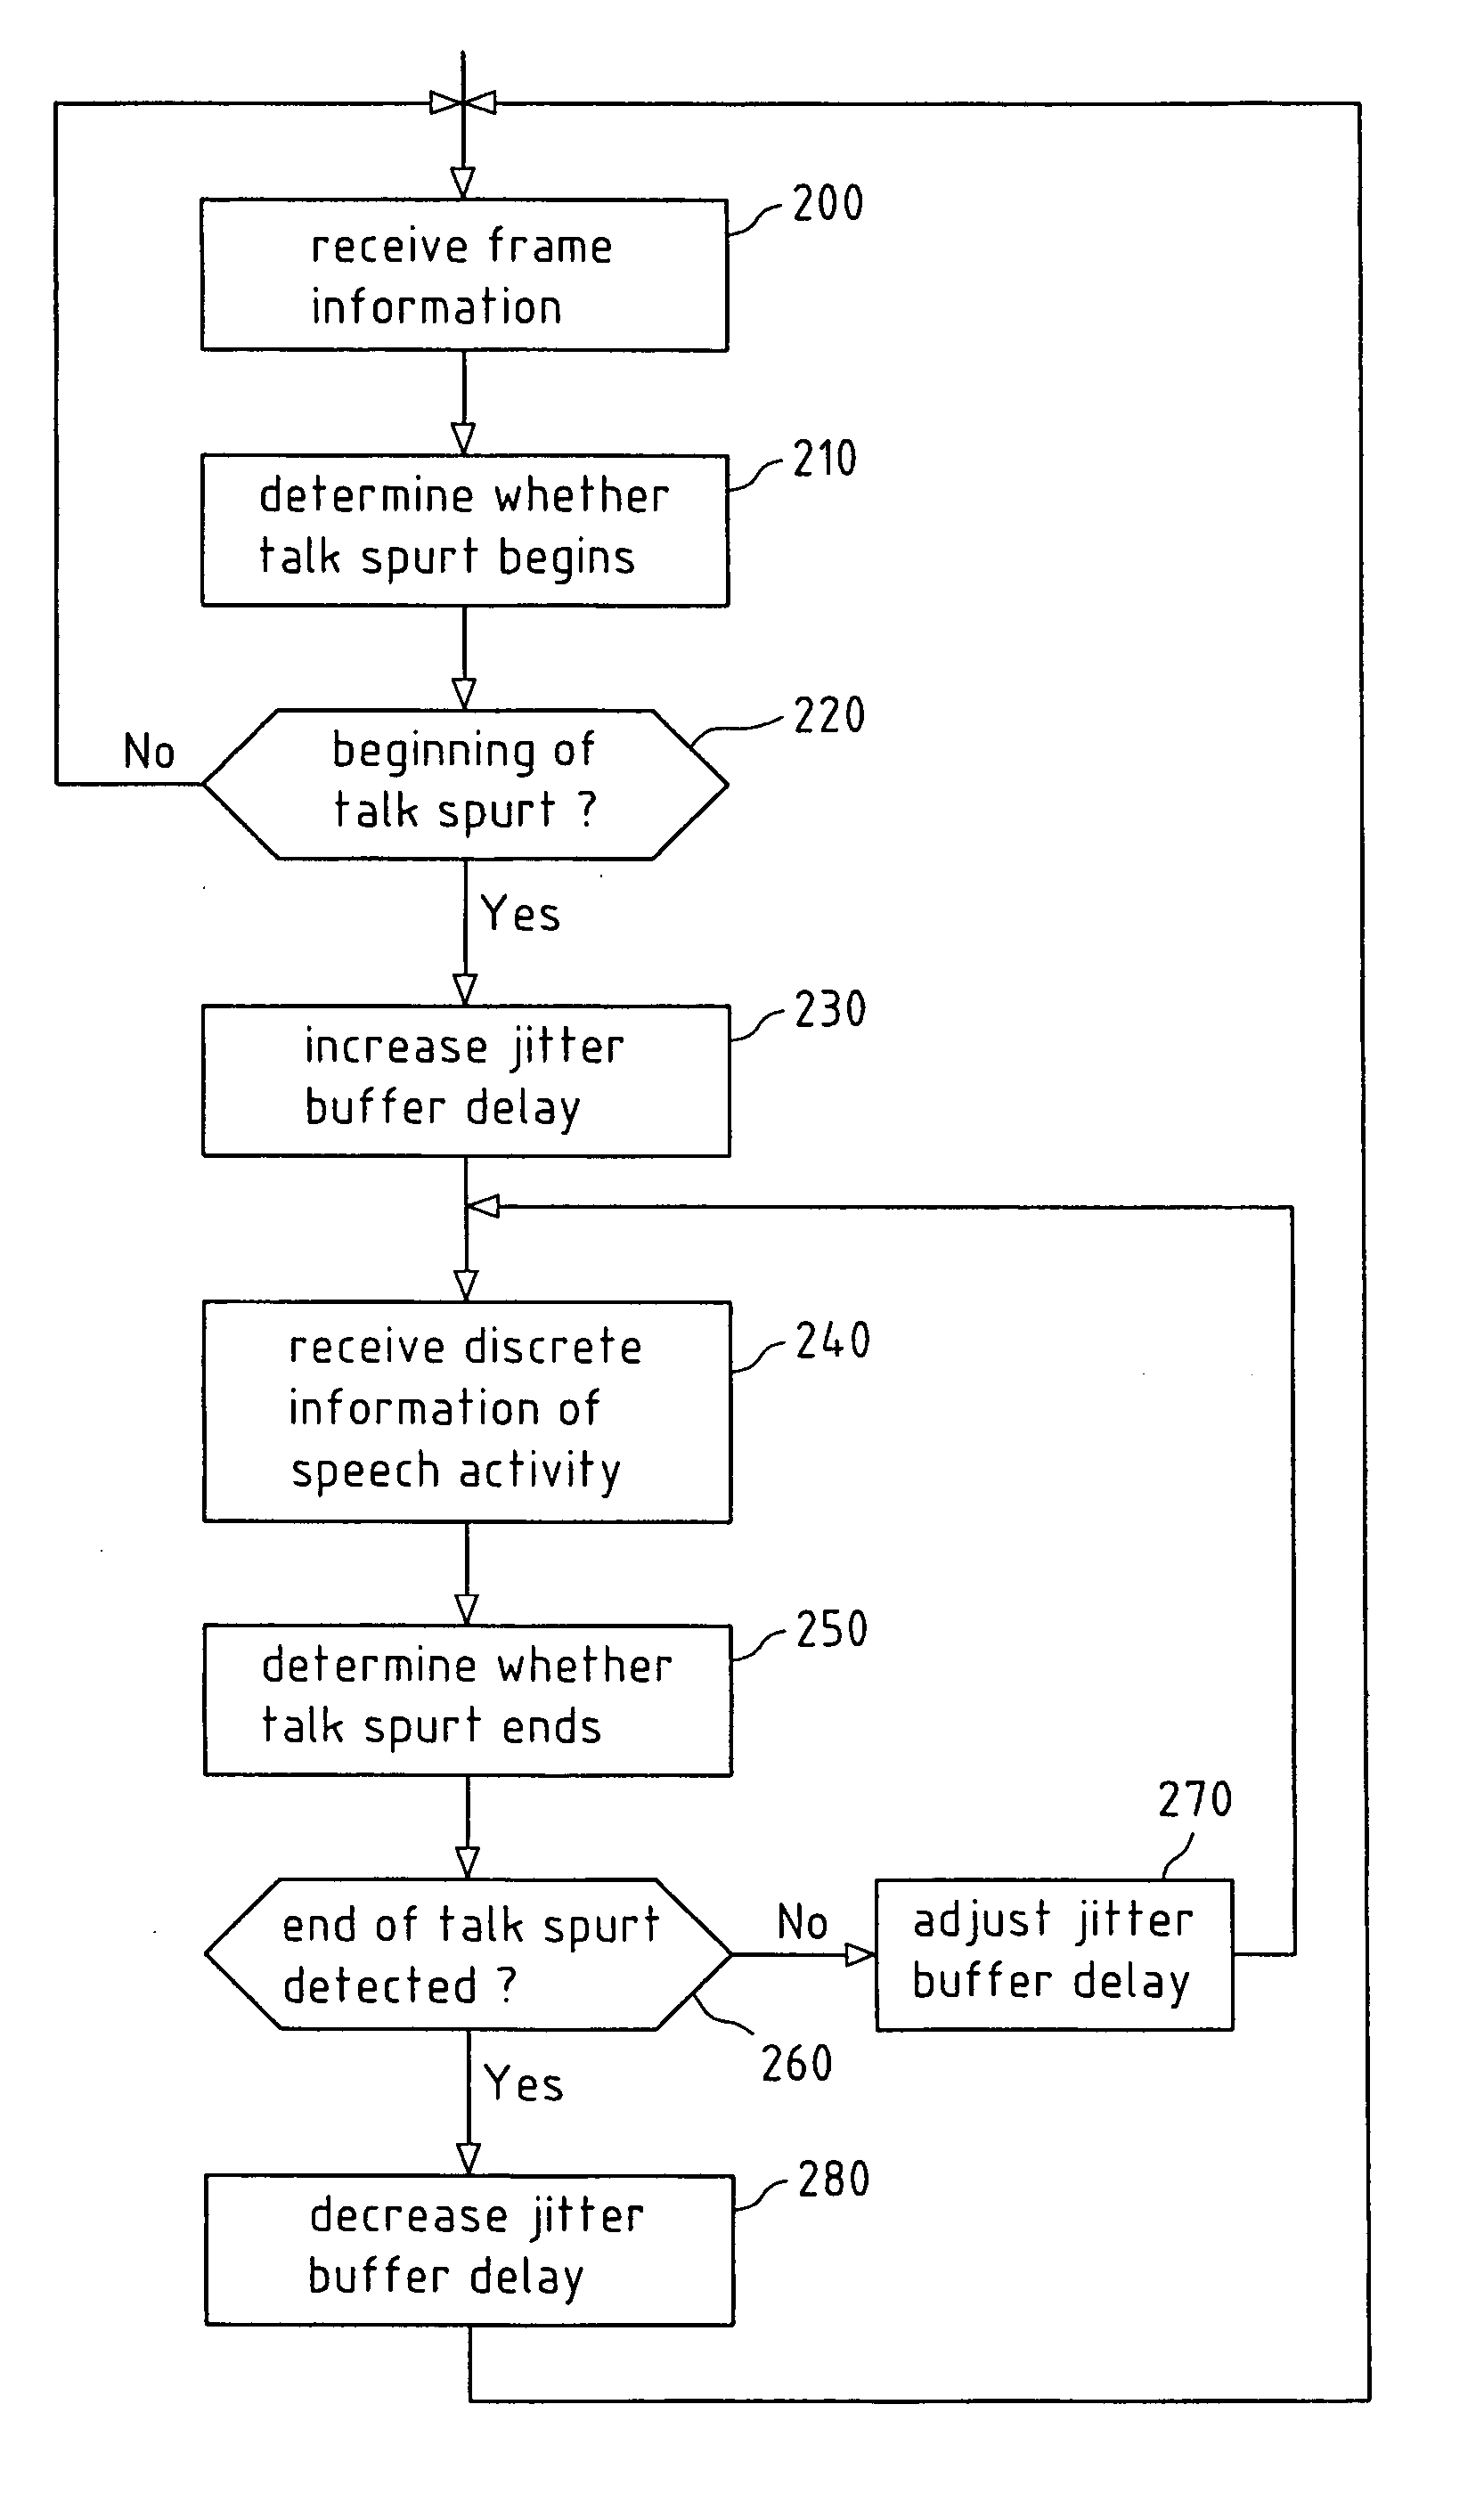 Adaptive jitter management control in decoder